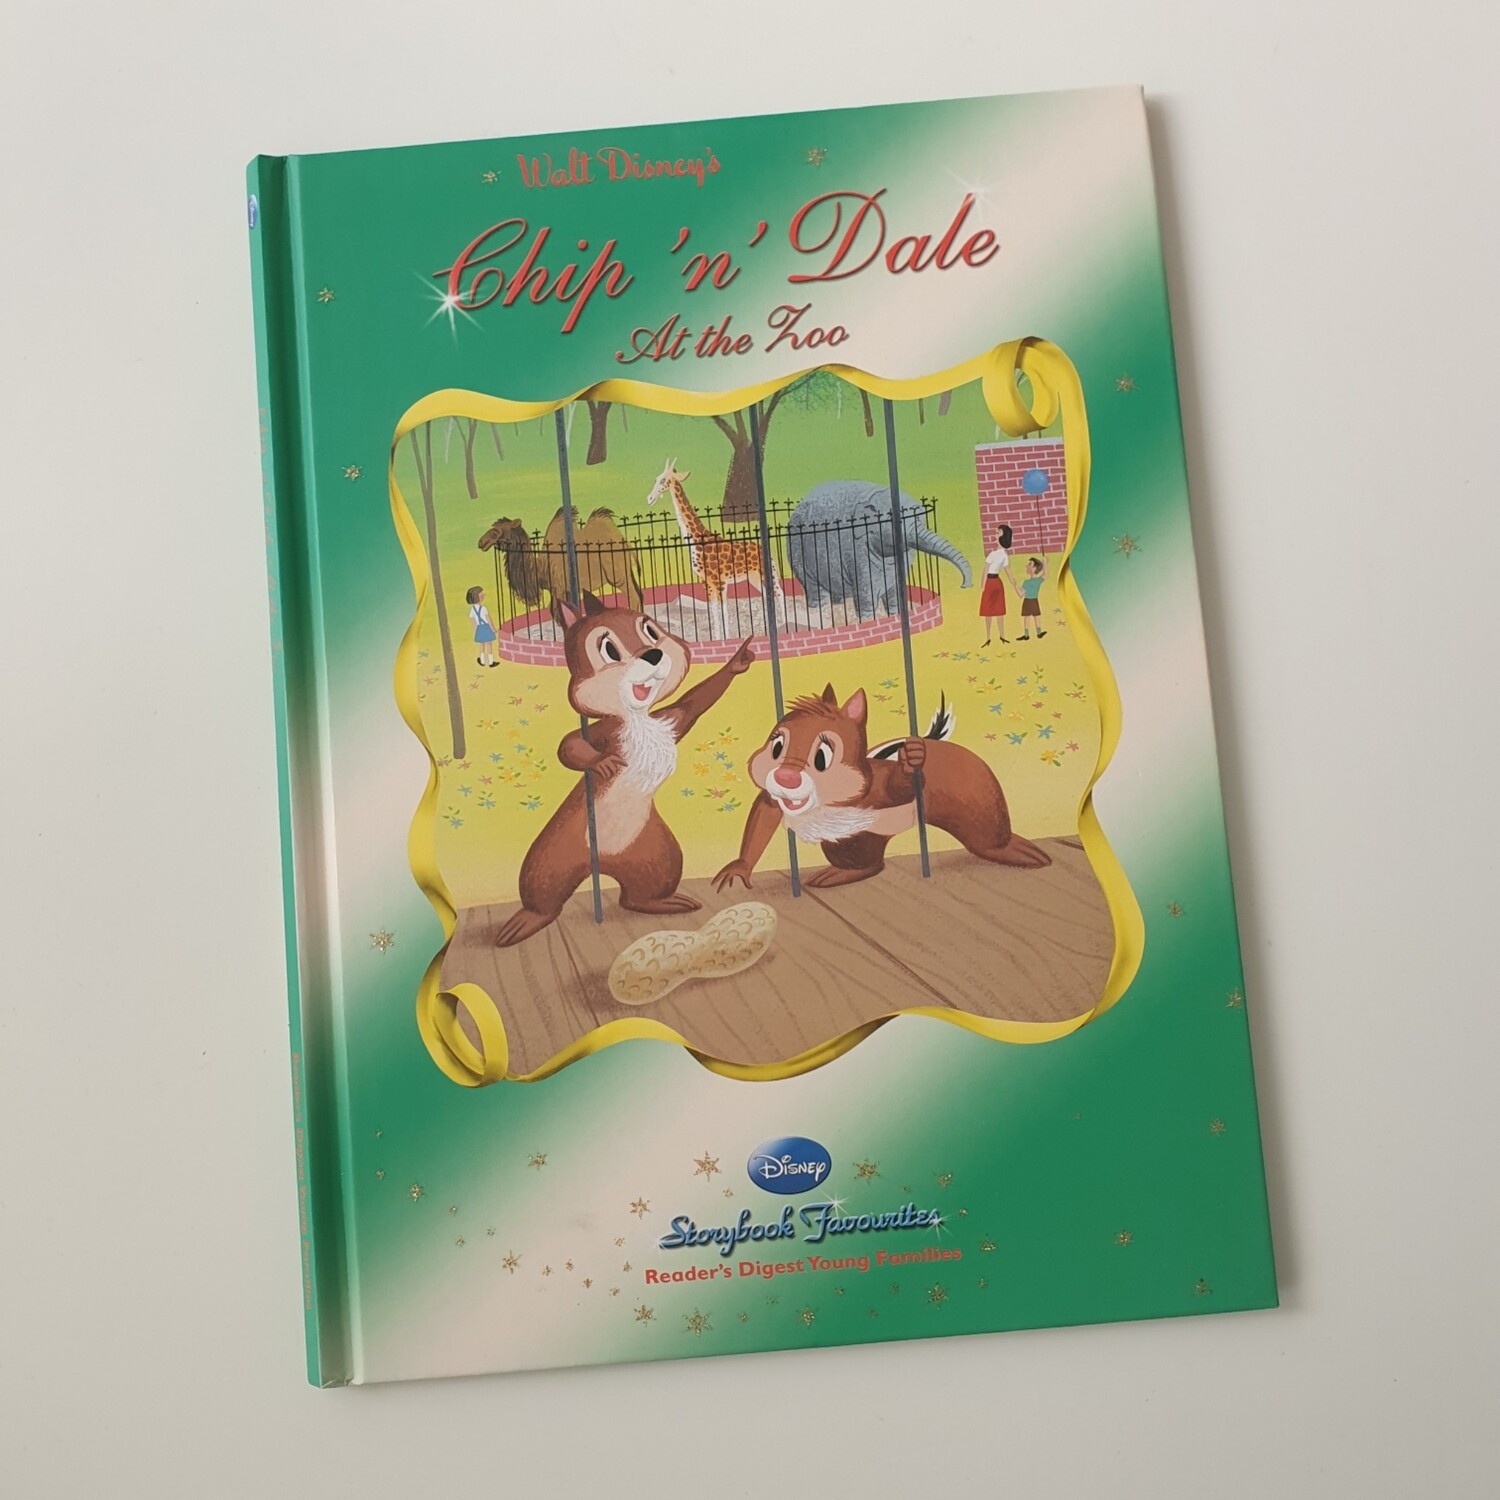 Chip and Dale at the zoo A4 notebook - no original book pages